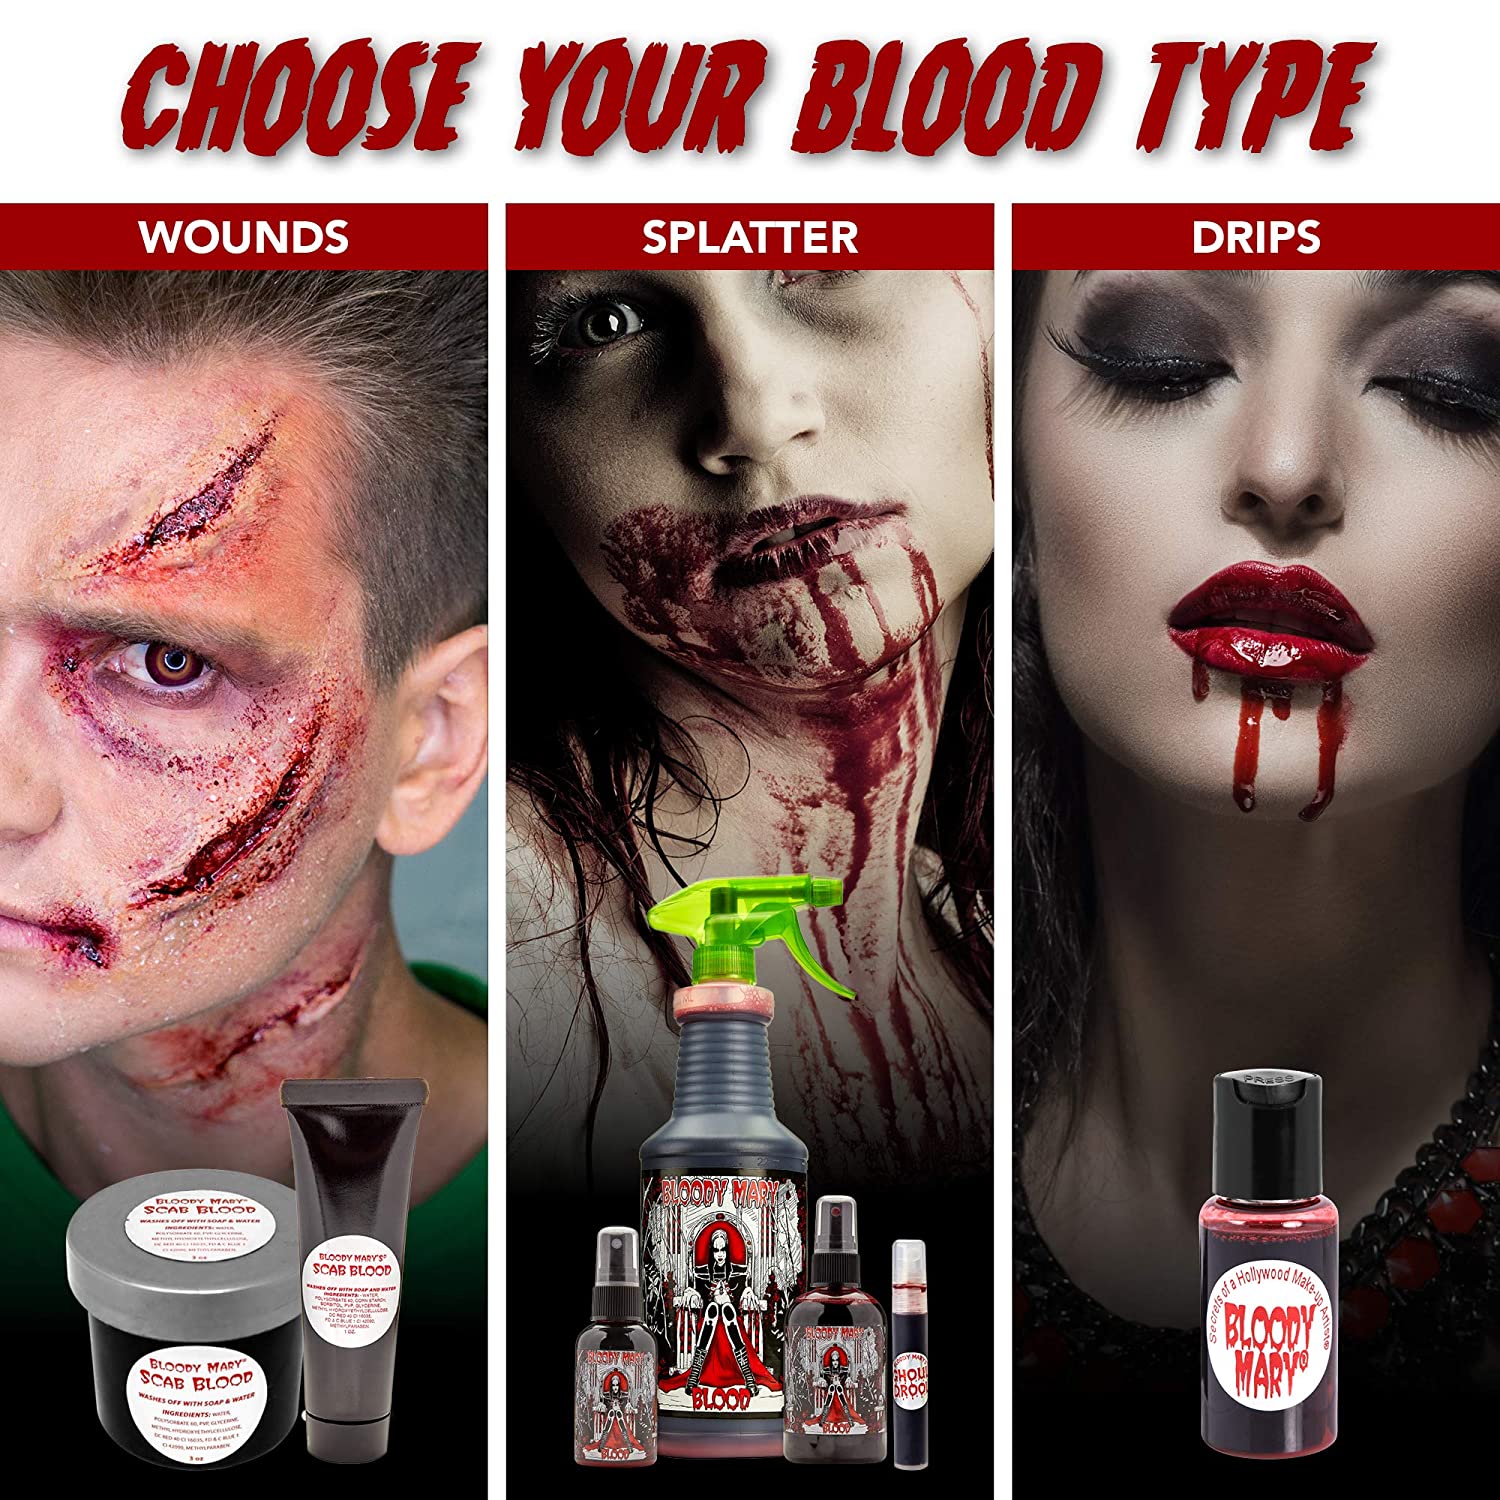 Bloody Mary Fake Blood Makeup Spray - 0.25oz - for Theater and Costume or Halloween Zombie, Vampire and Monster Dress Up